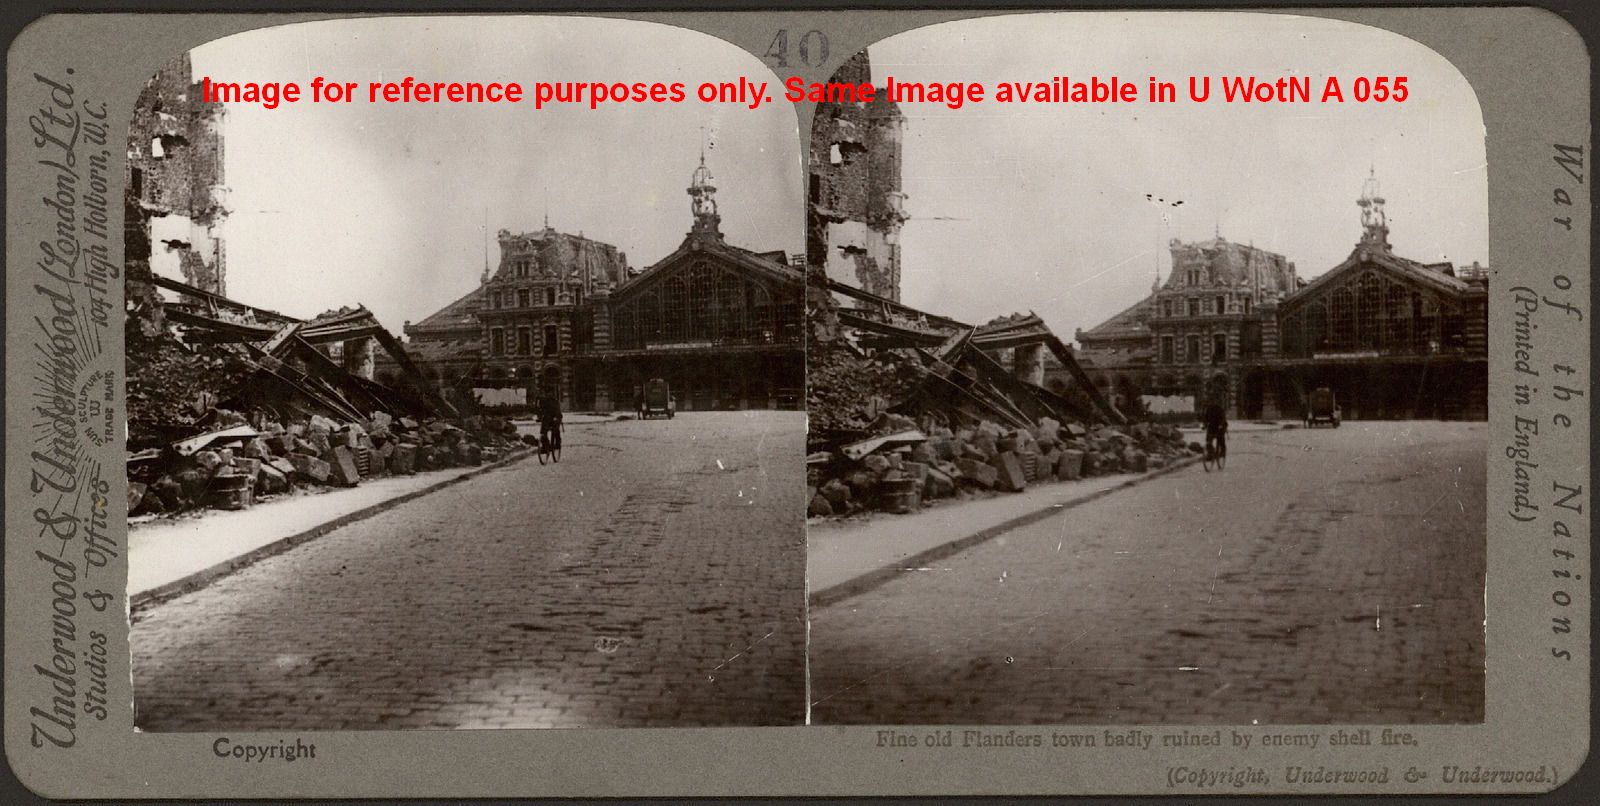 Fine old Flanders town badly ruined by enemy shell fire